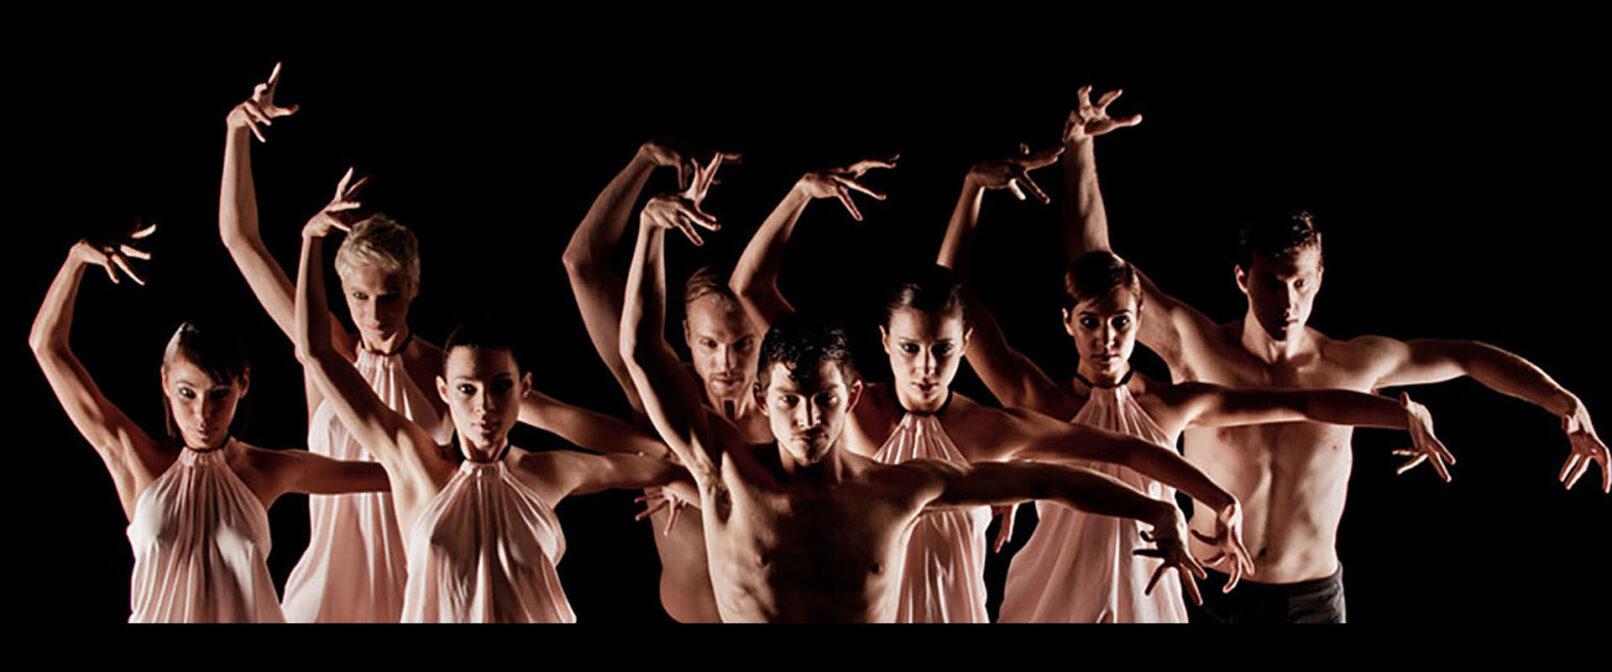 Ballets Jazz de Montreal. A group of fair skinned dancers stands facing the camera aith their right arms curved above their heads and left arms outstretched to the side.